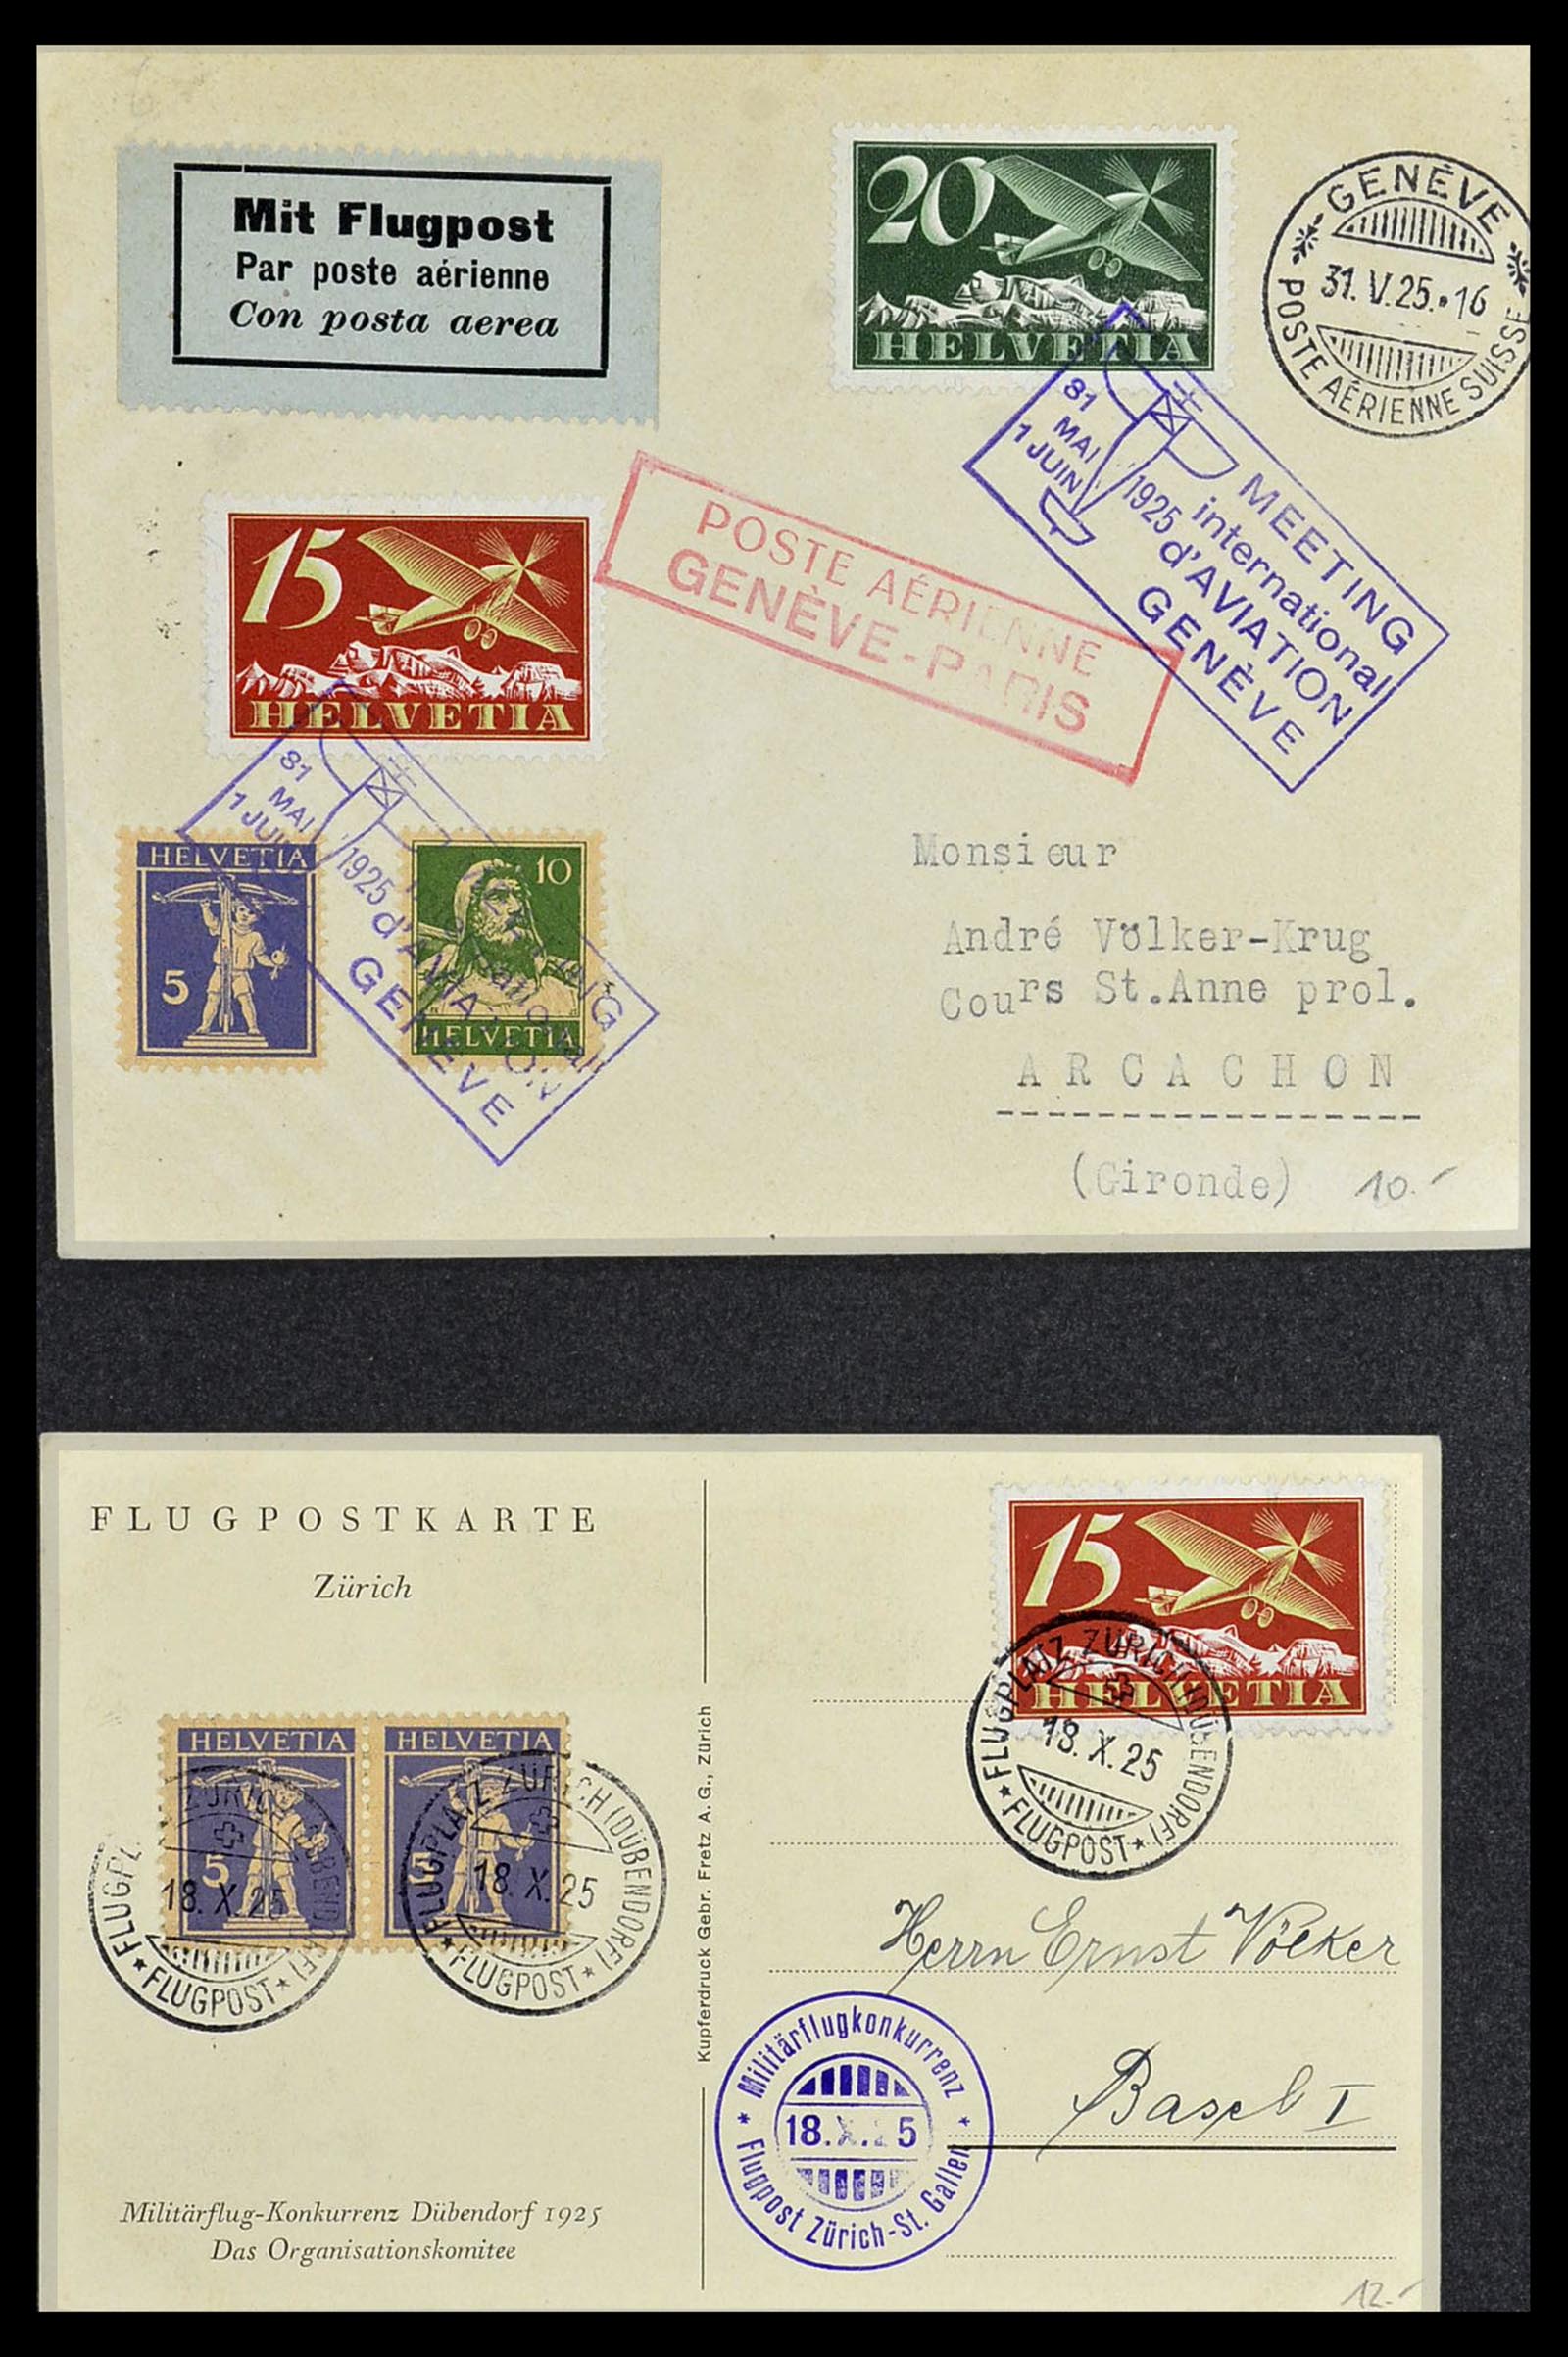 34141 105 - Stamp collection 34141 Switzerland airmail covers 1920-1960.